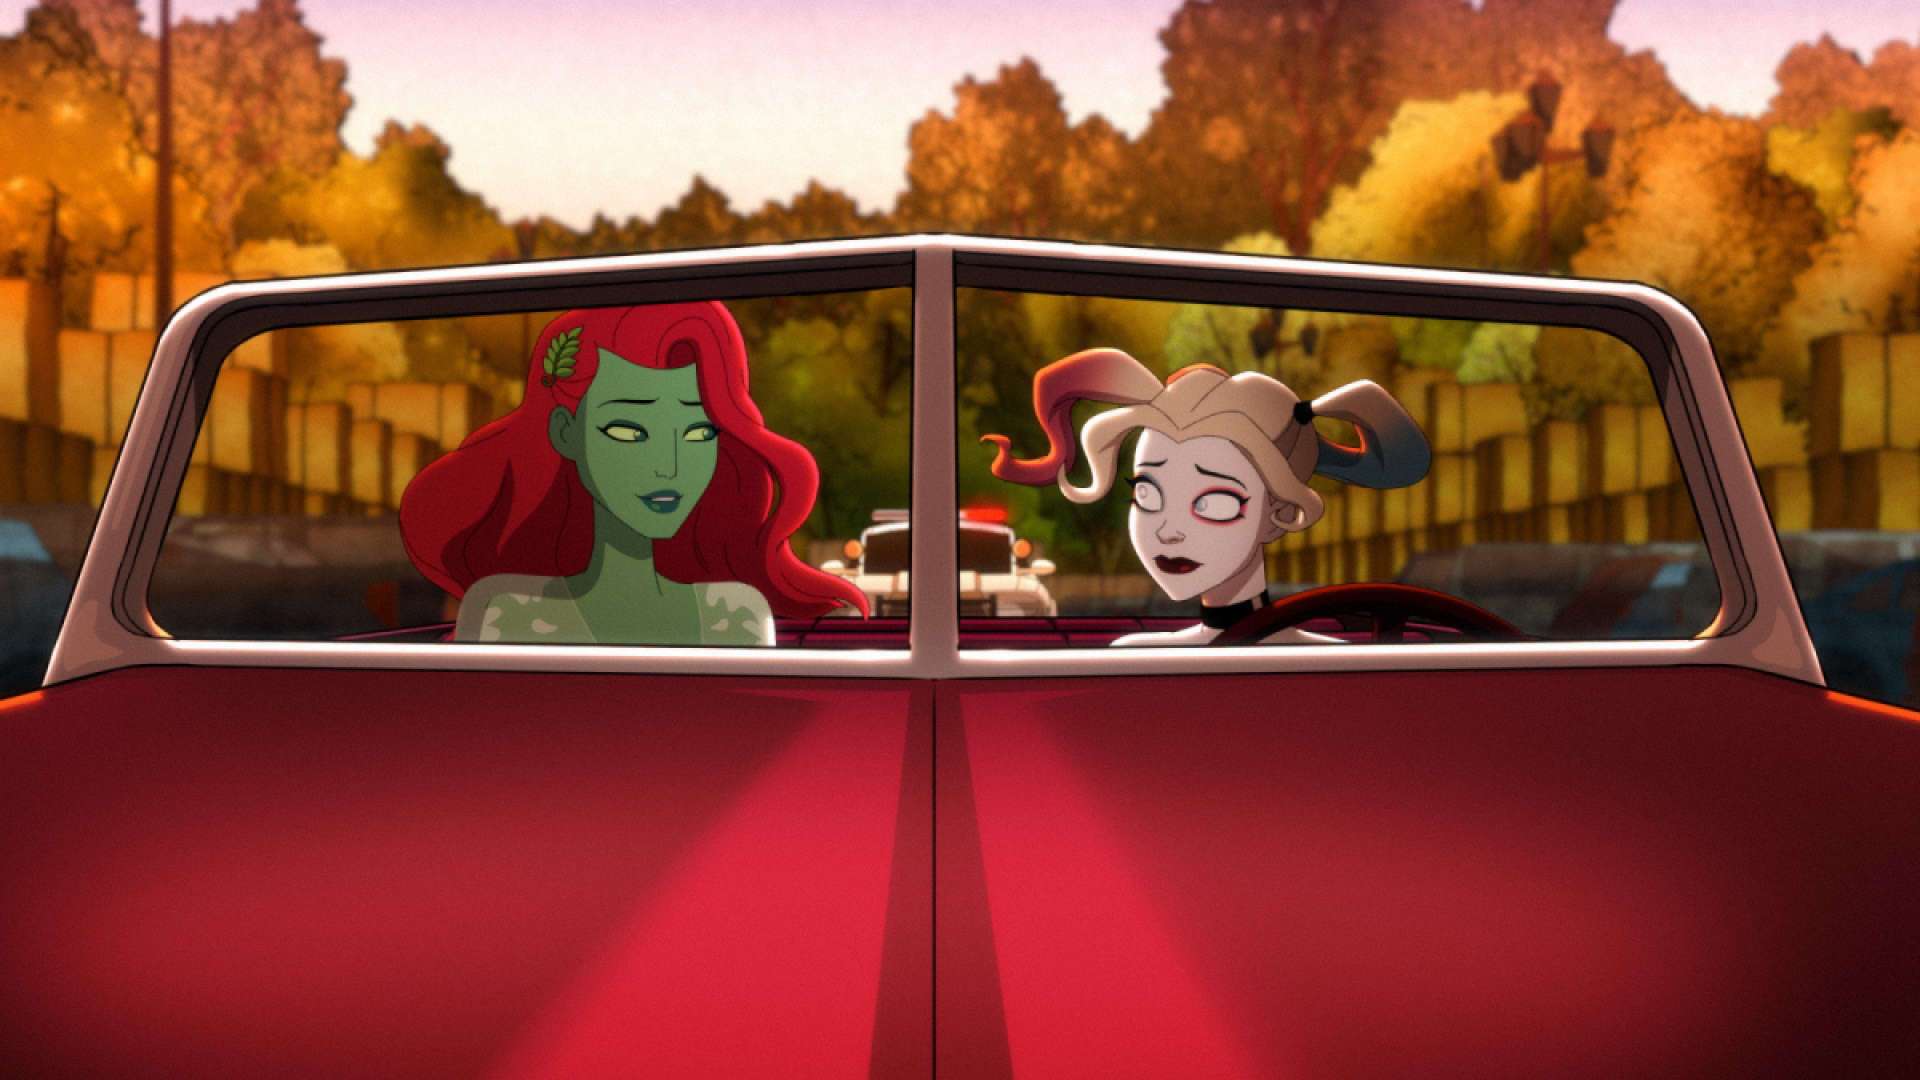 Harley and Ivy sat in a Car